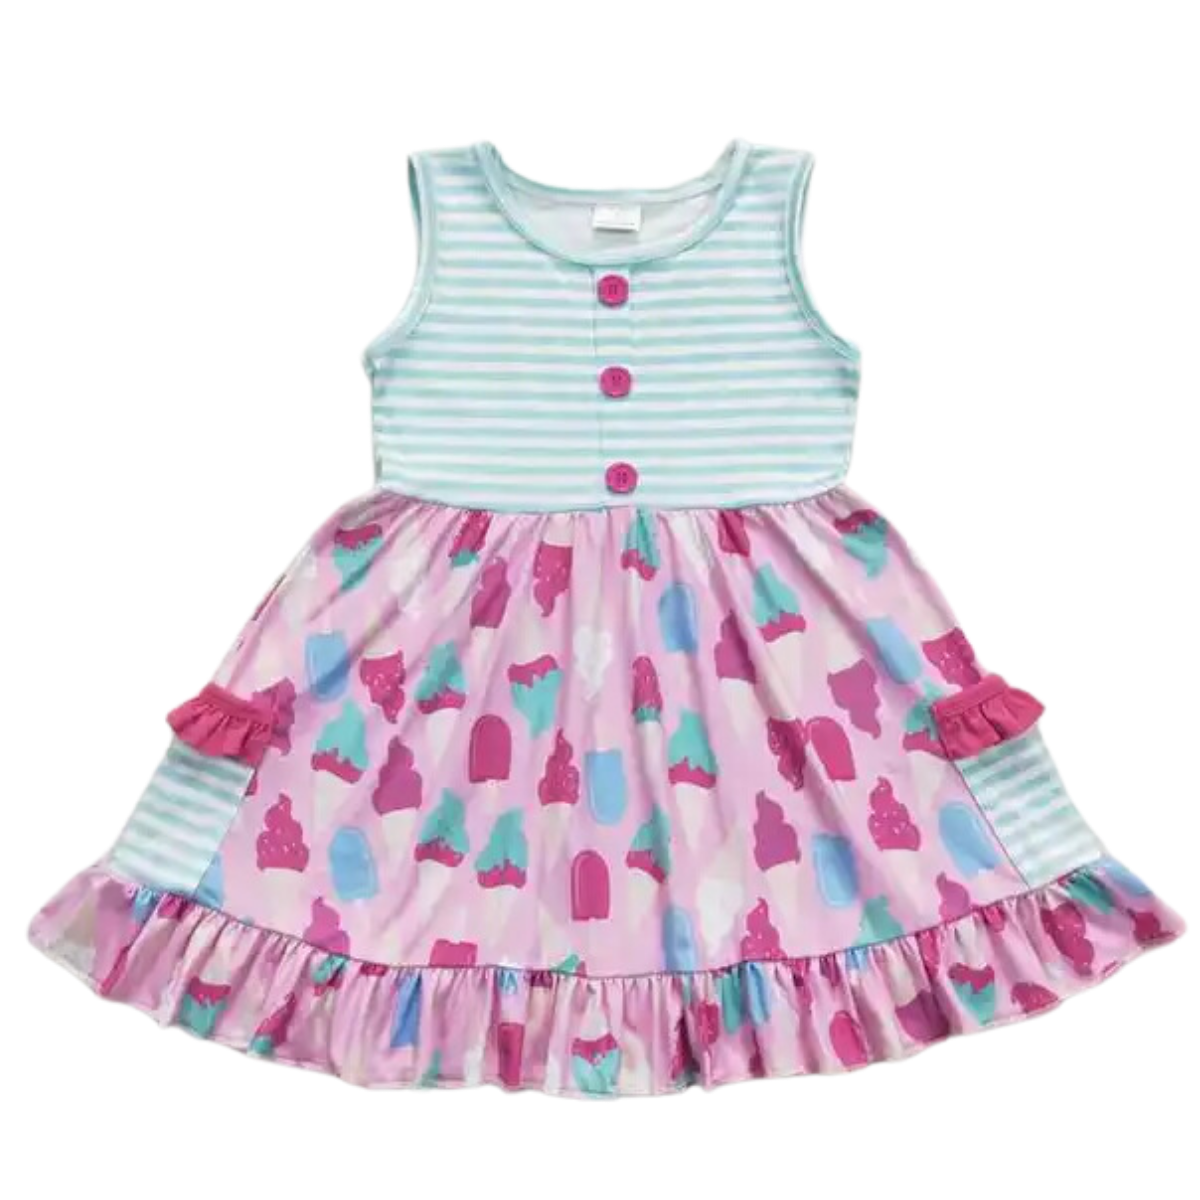 Whimsical Dress Exceptional Ice Cream - Kids Clothes